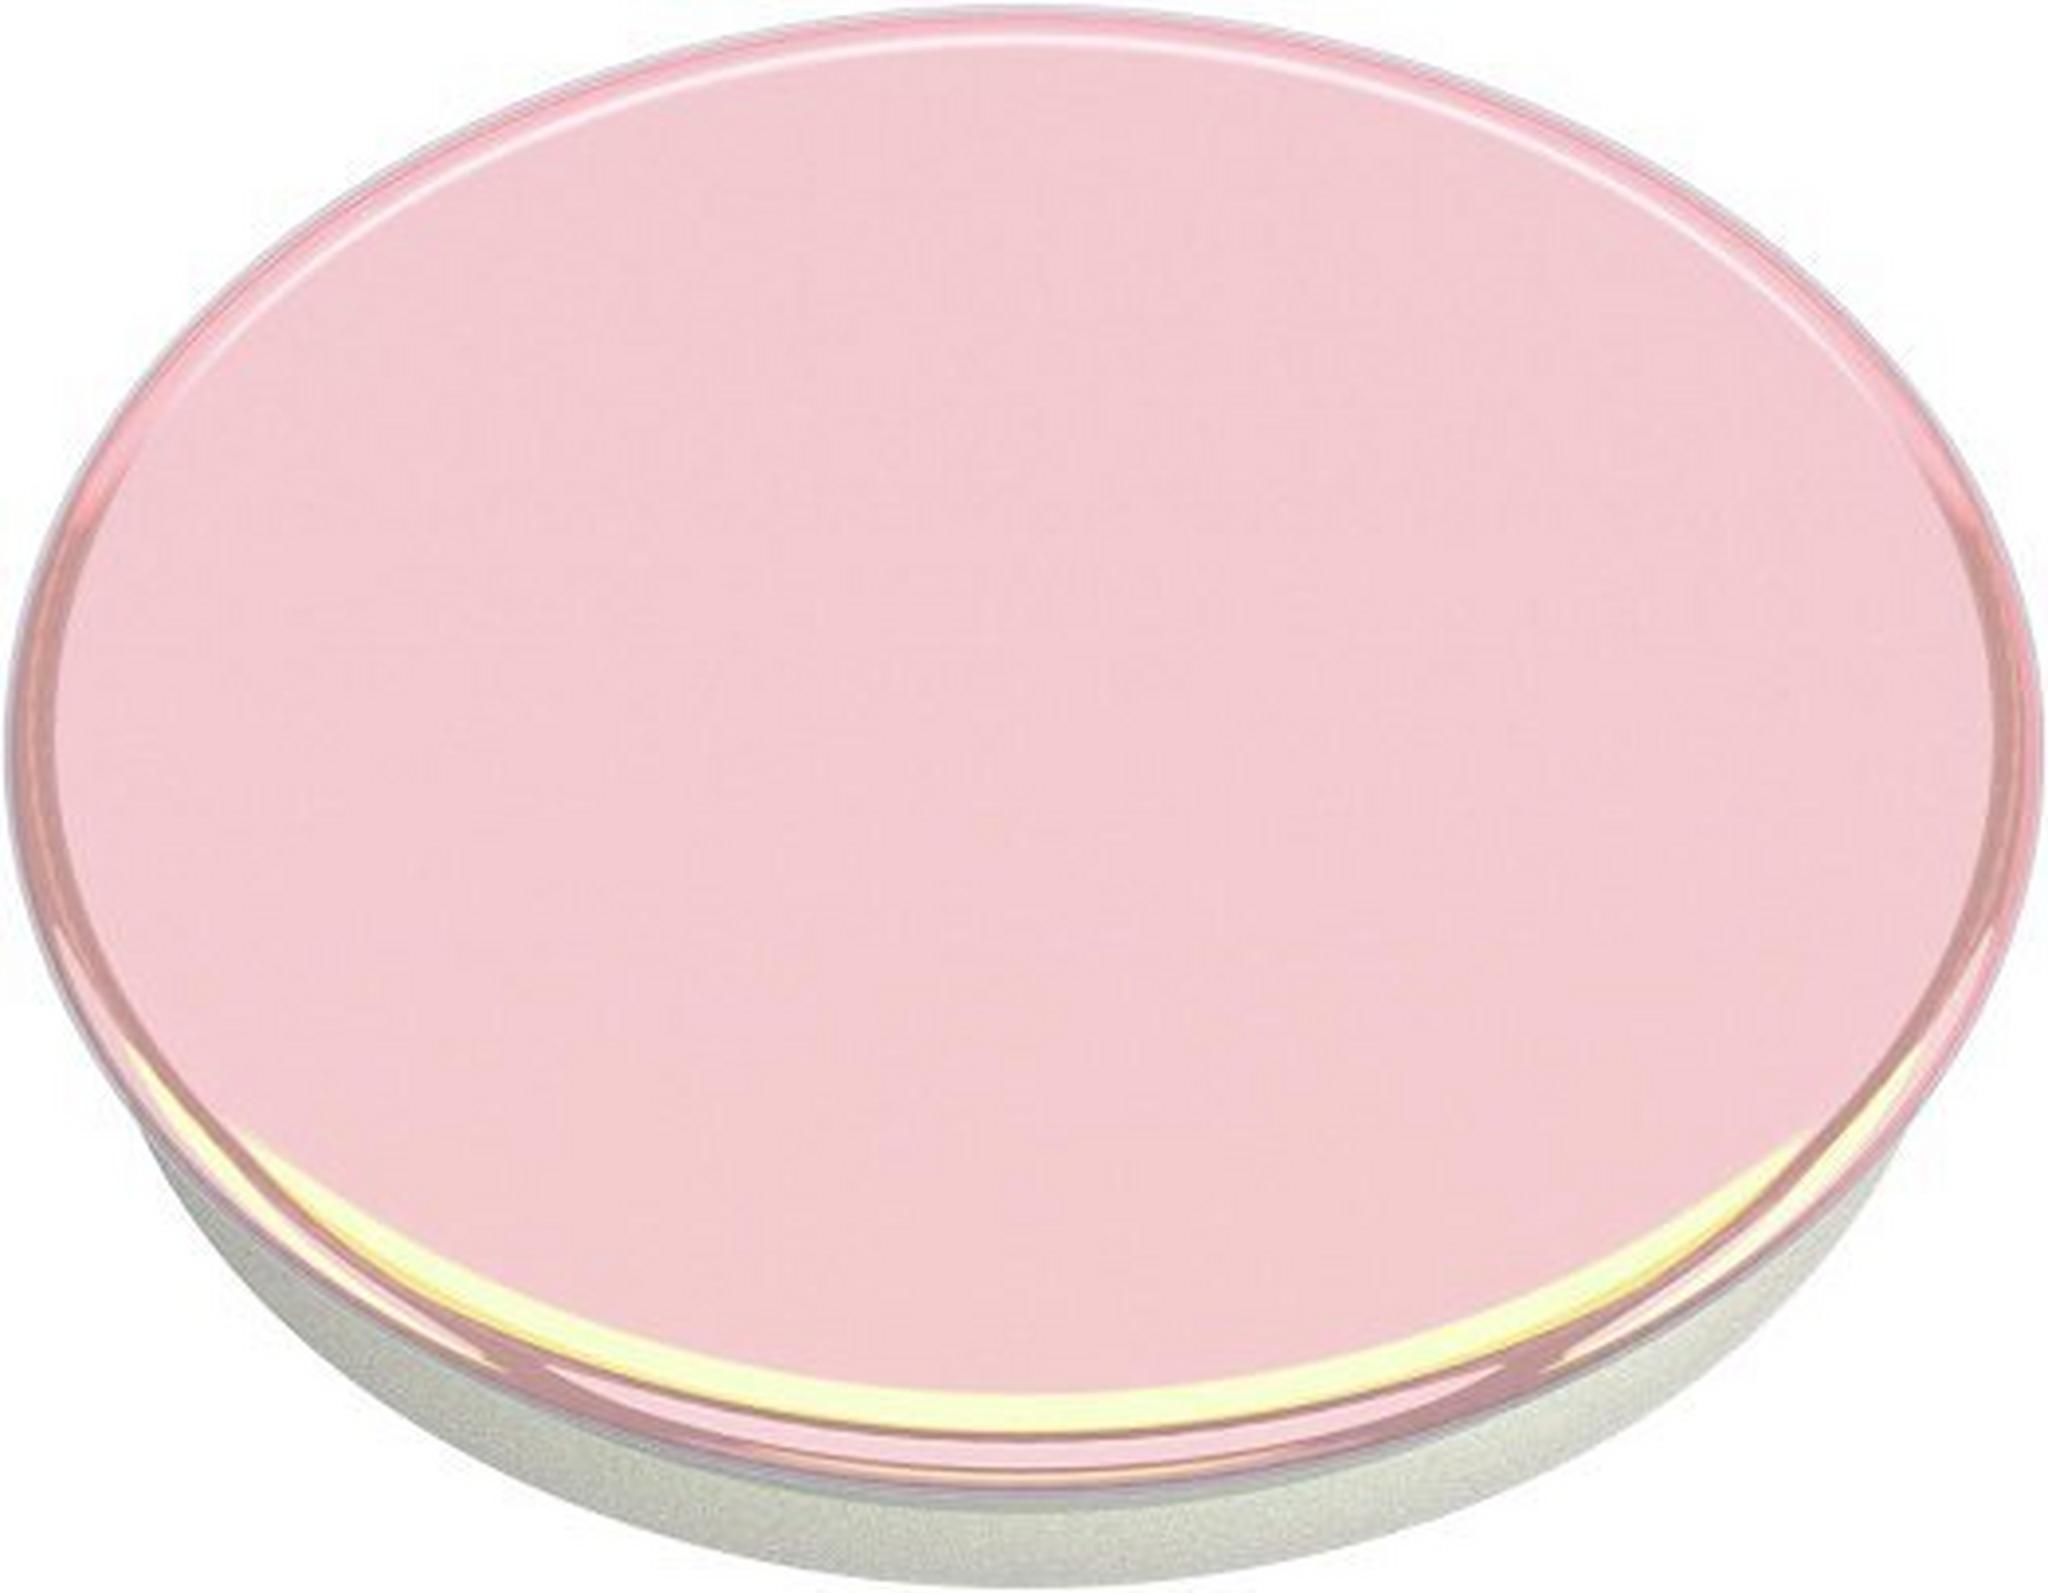 PopSockets Phone Stand and Grip (801898) – Chrome Powder Pink